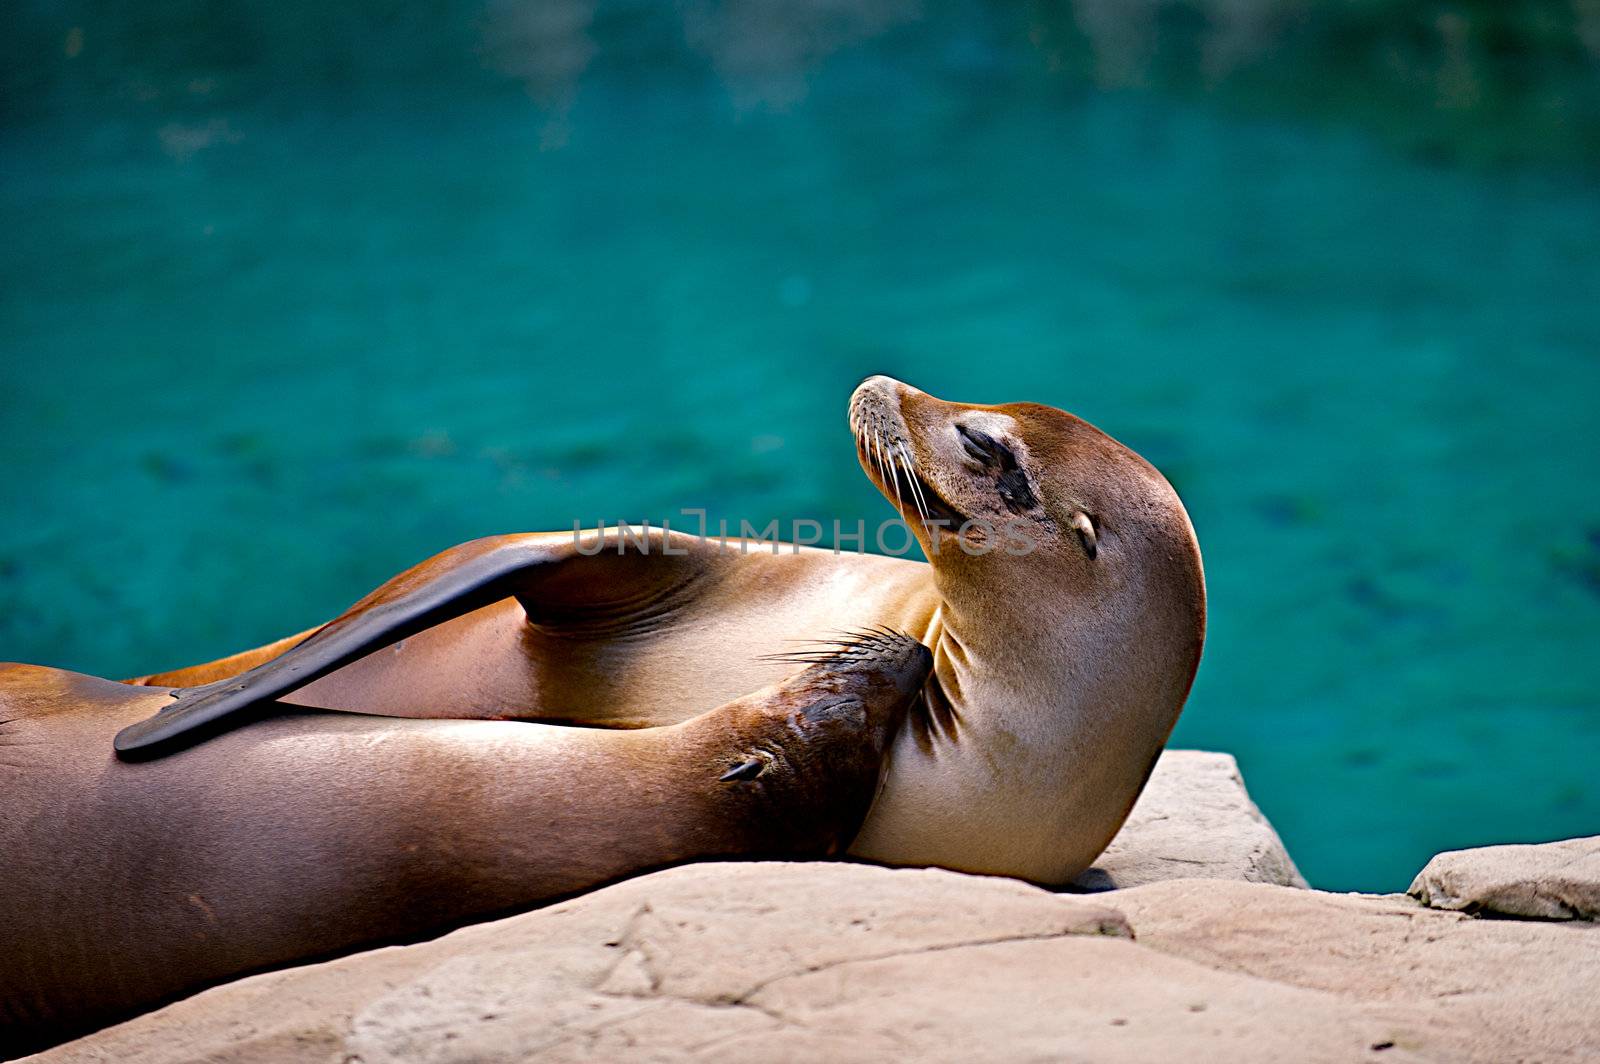 Two seals cuddle together while basking in the sunlight on rocks.  One holds flipper over the other.